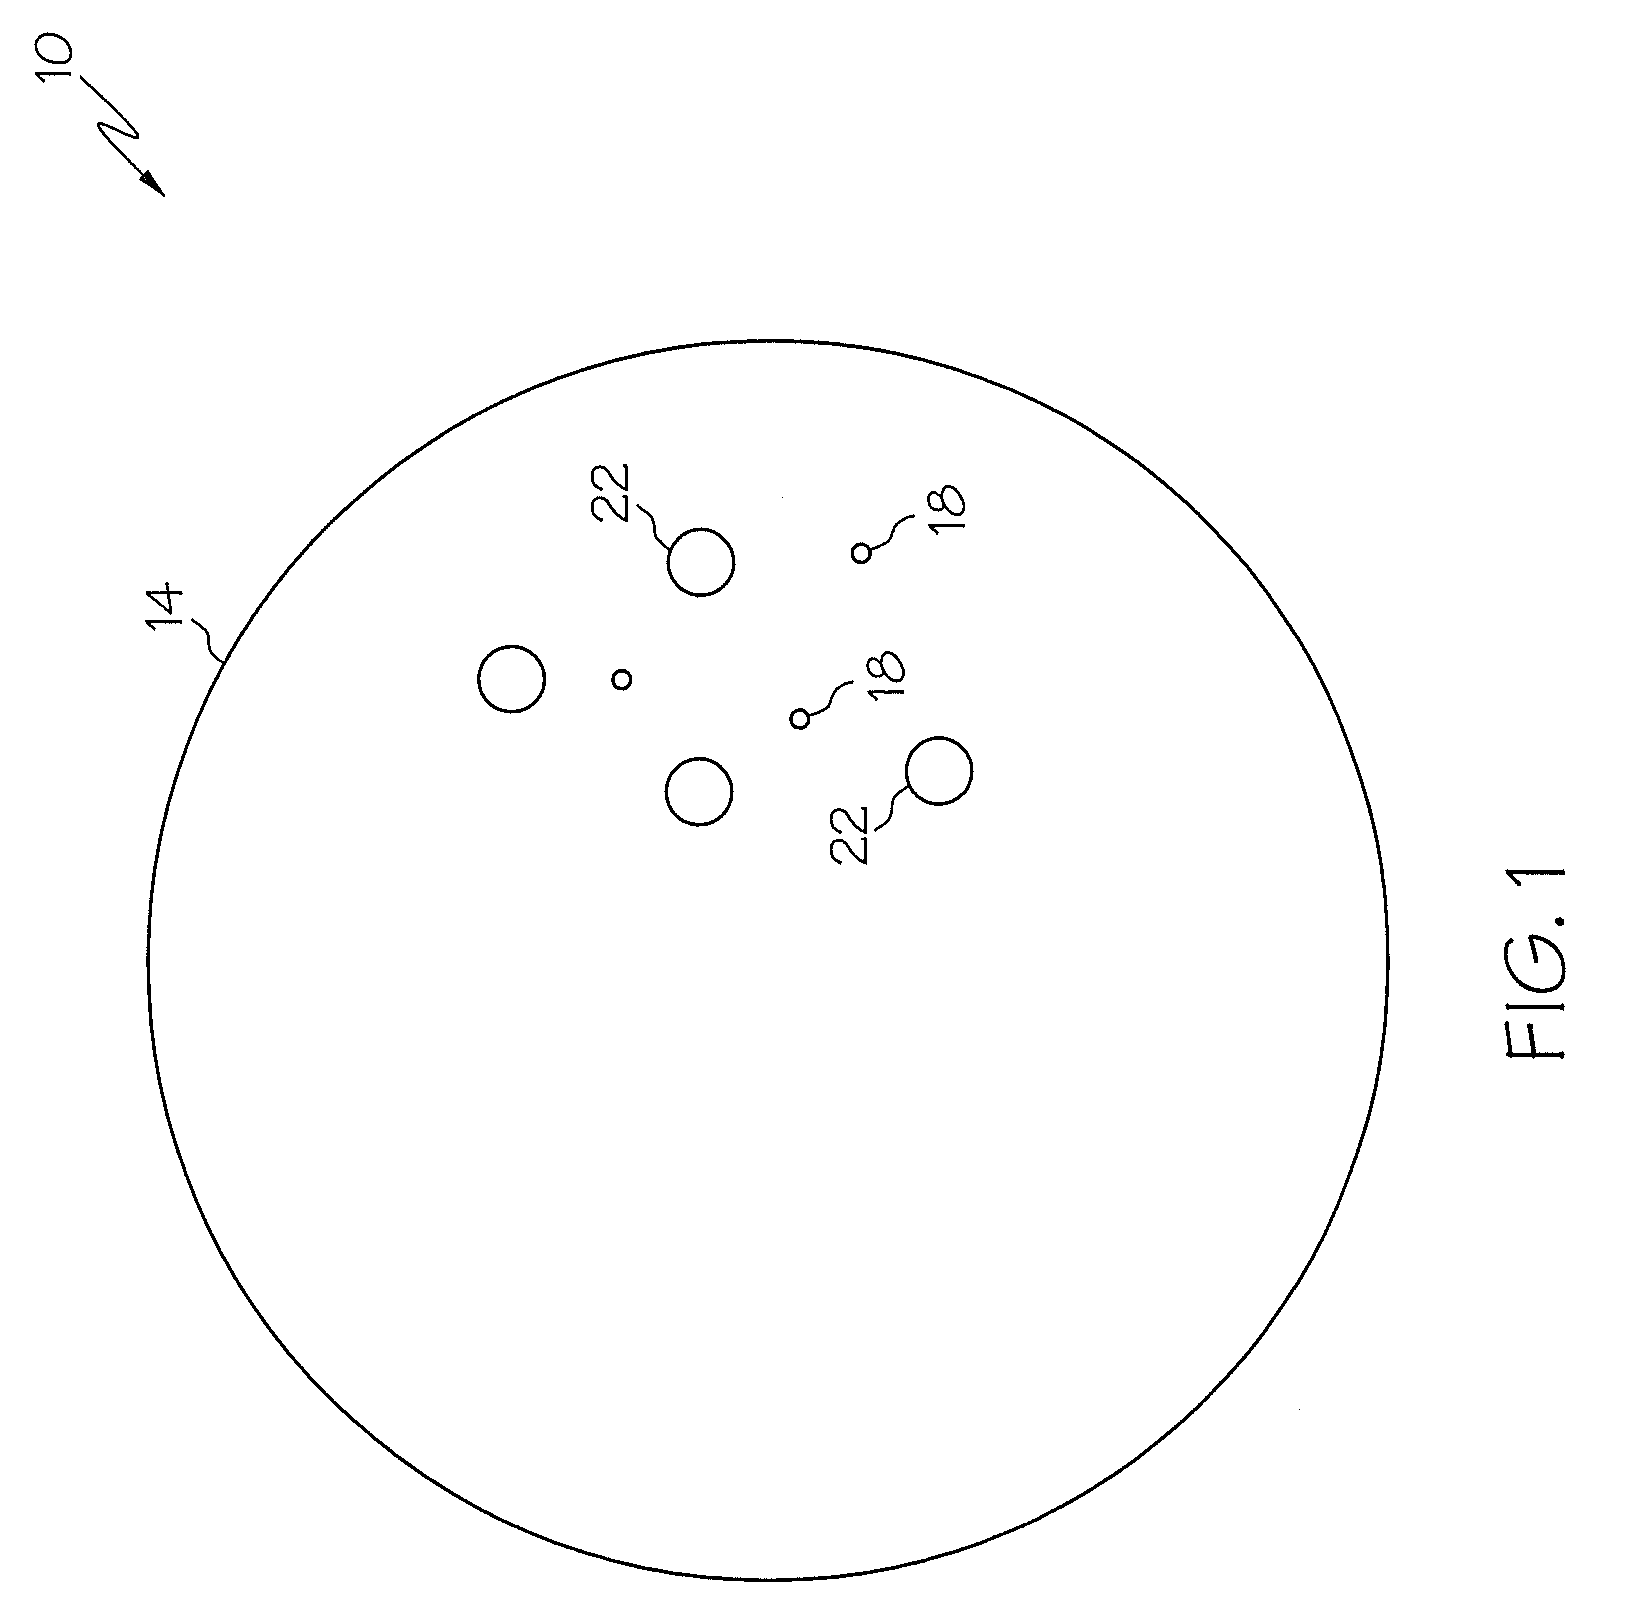 Dissolvable downhole tool, method of making and using